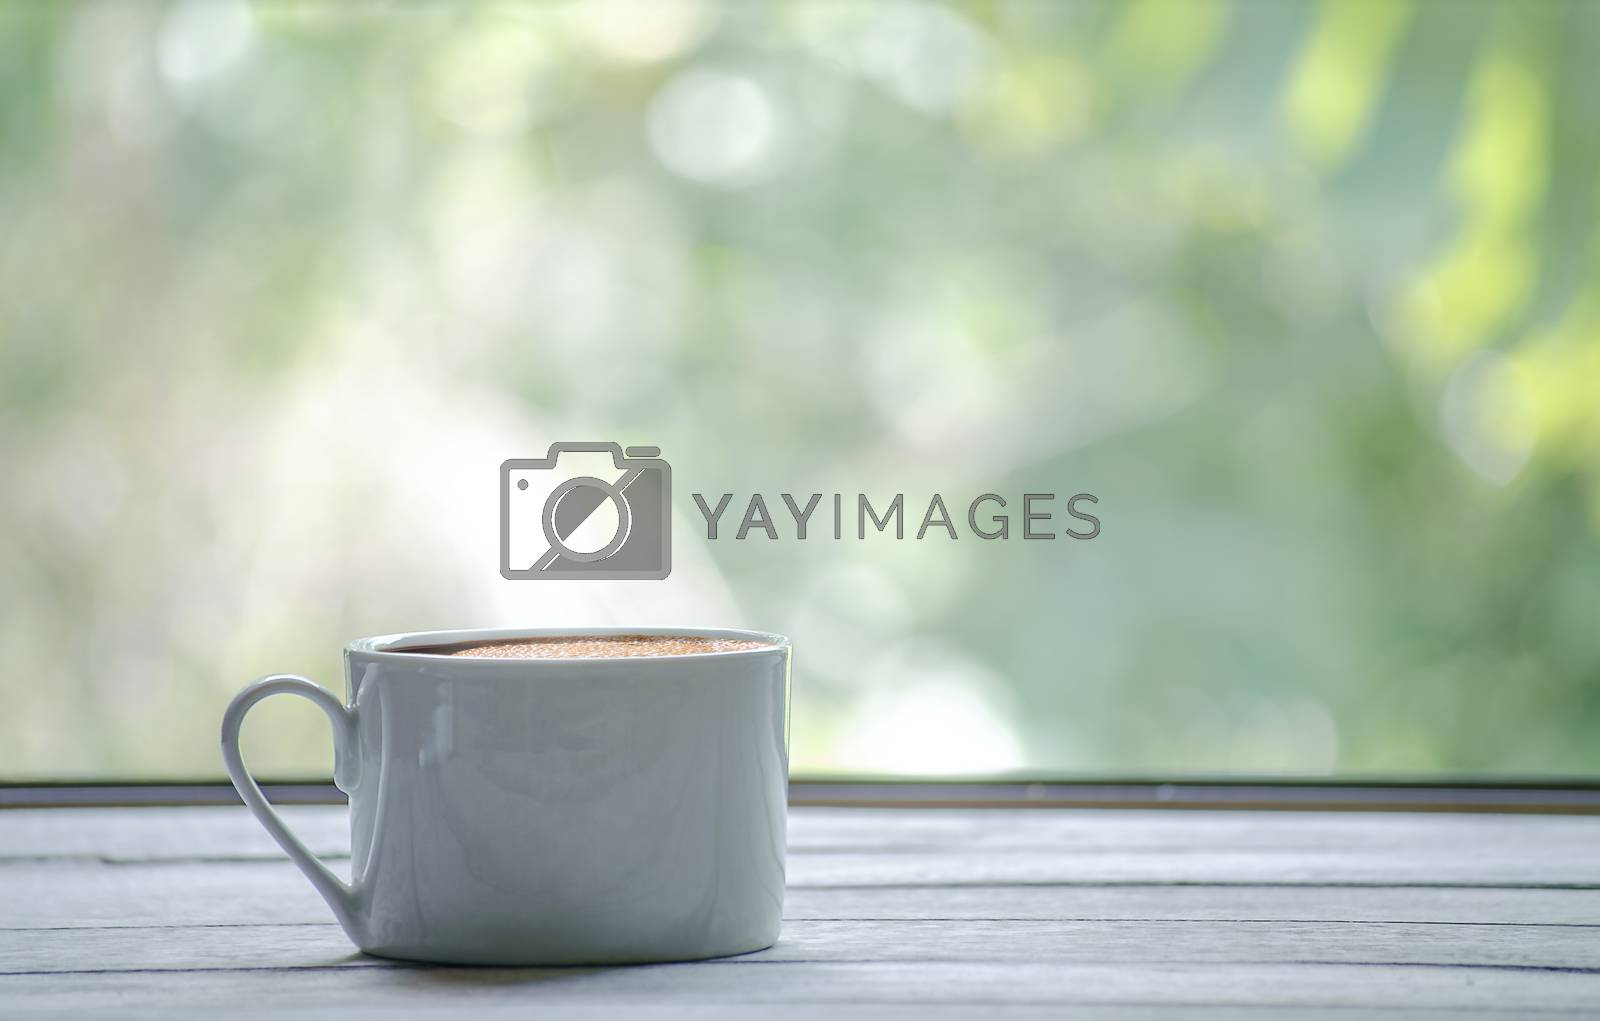 Royalty free image of Coffee cup on table by yodsawai